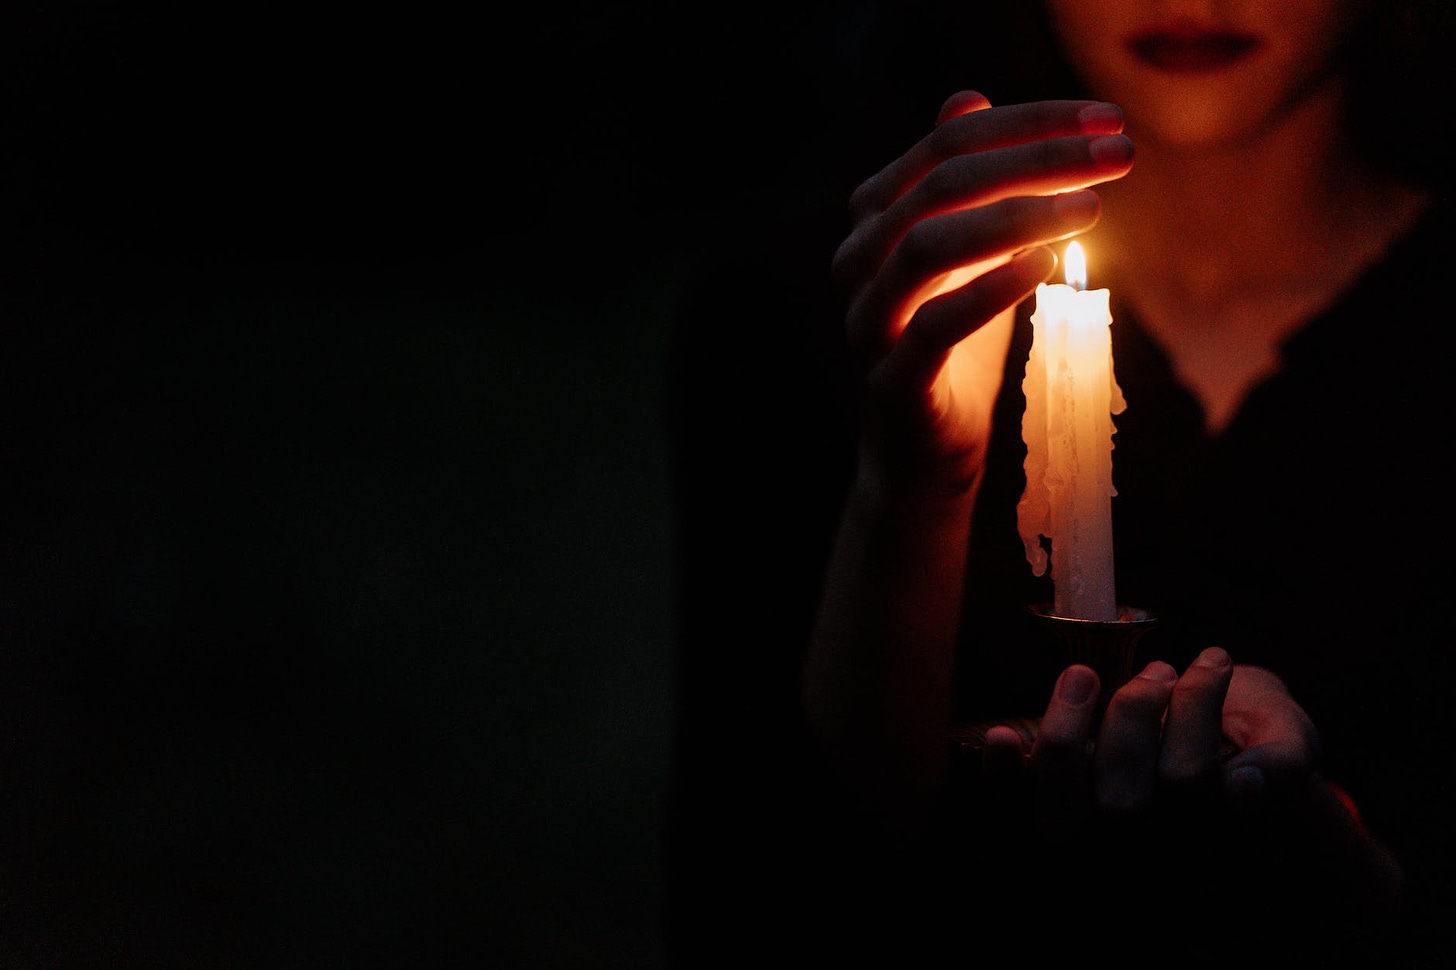 a person covering the lighted candle he is holding